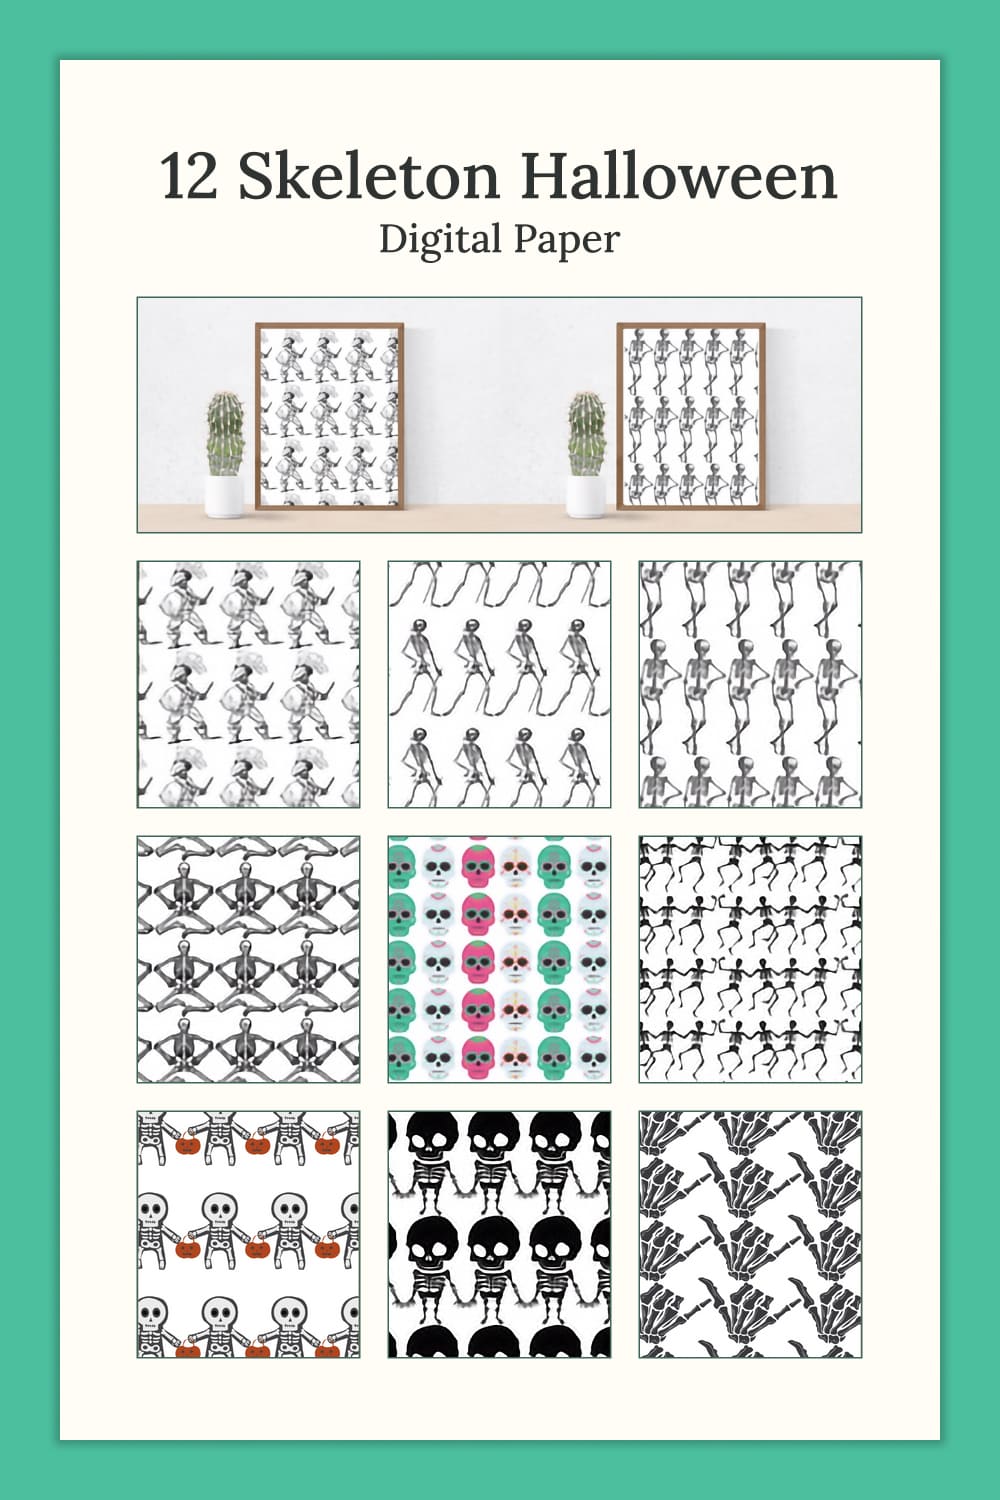 Collection of beautiful paper retro patterns with skeletons.